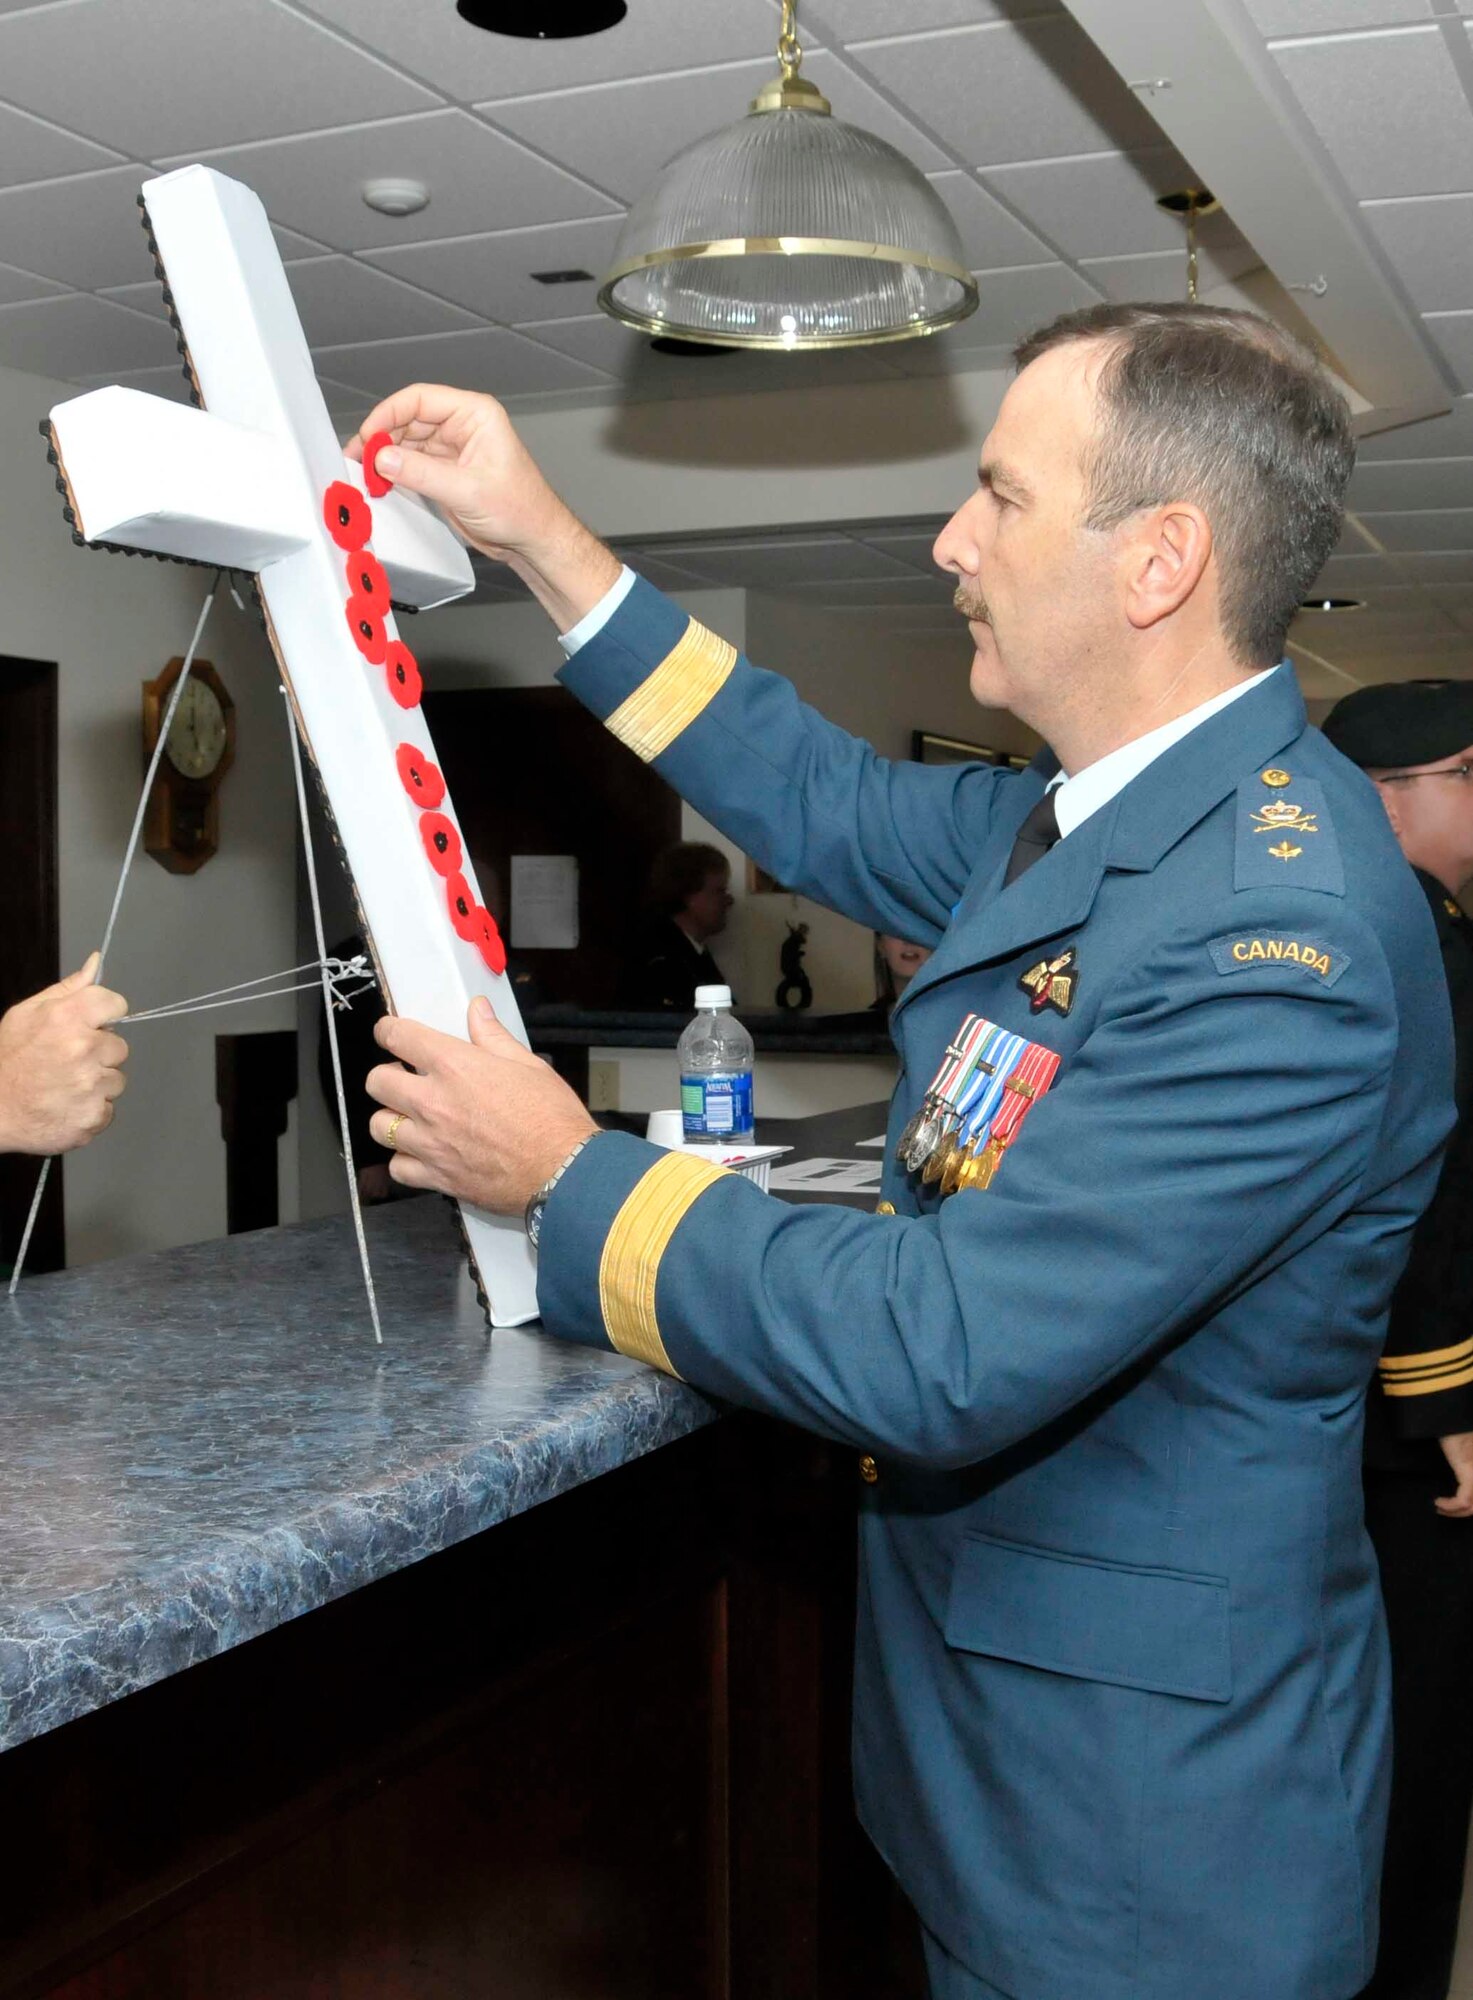 Continental U.S. NORAD Region deputy commander Brig. Gen. André Viens, Continental U.S. NORAD Region deputy commander, places a traditional poppy on a cross during Canadian Remembrance Day Nov. 11, 2009, commemorating the sacrifices of the members of the Armed Forces.  (U.S. Air Force photo)